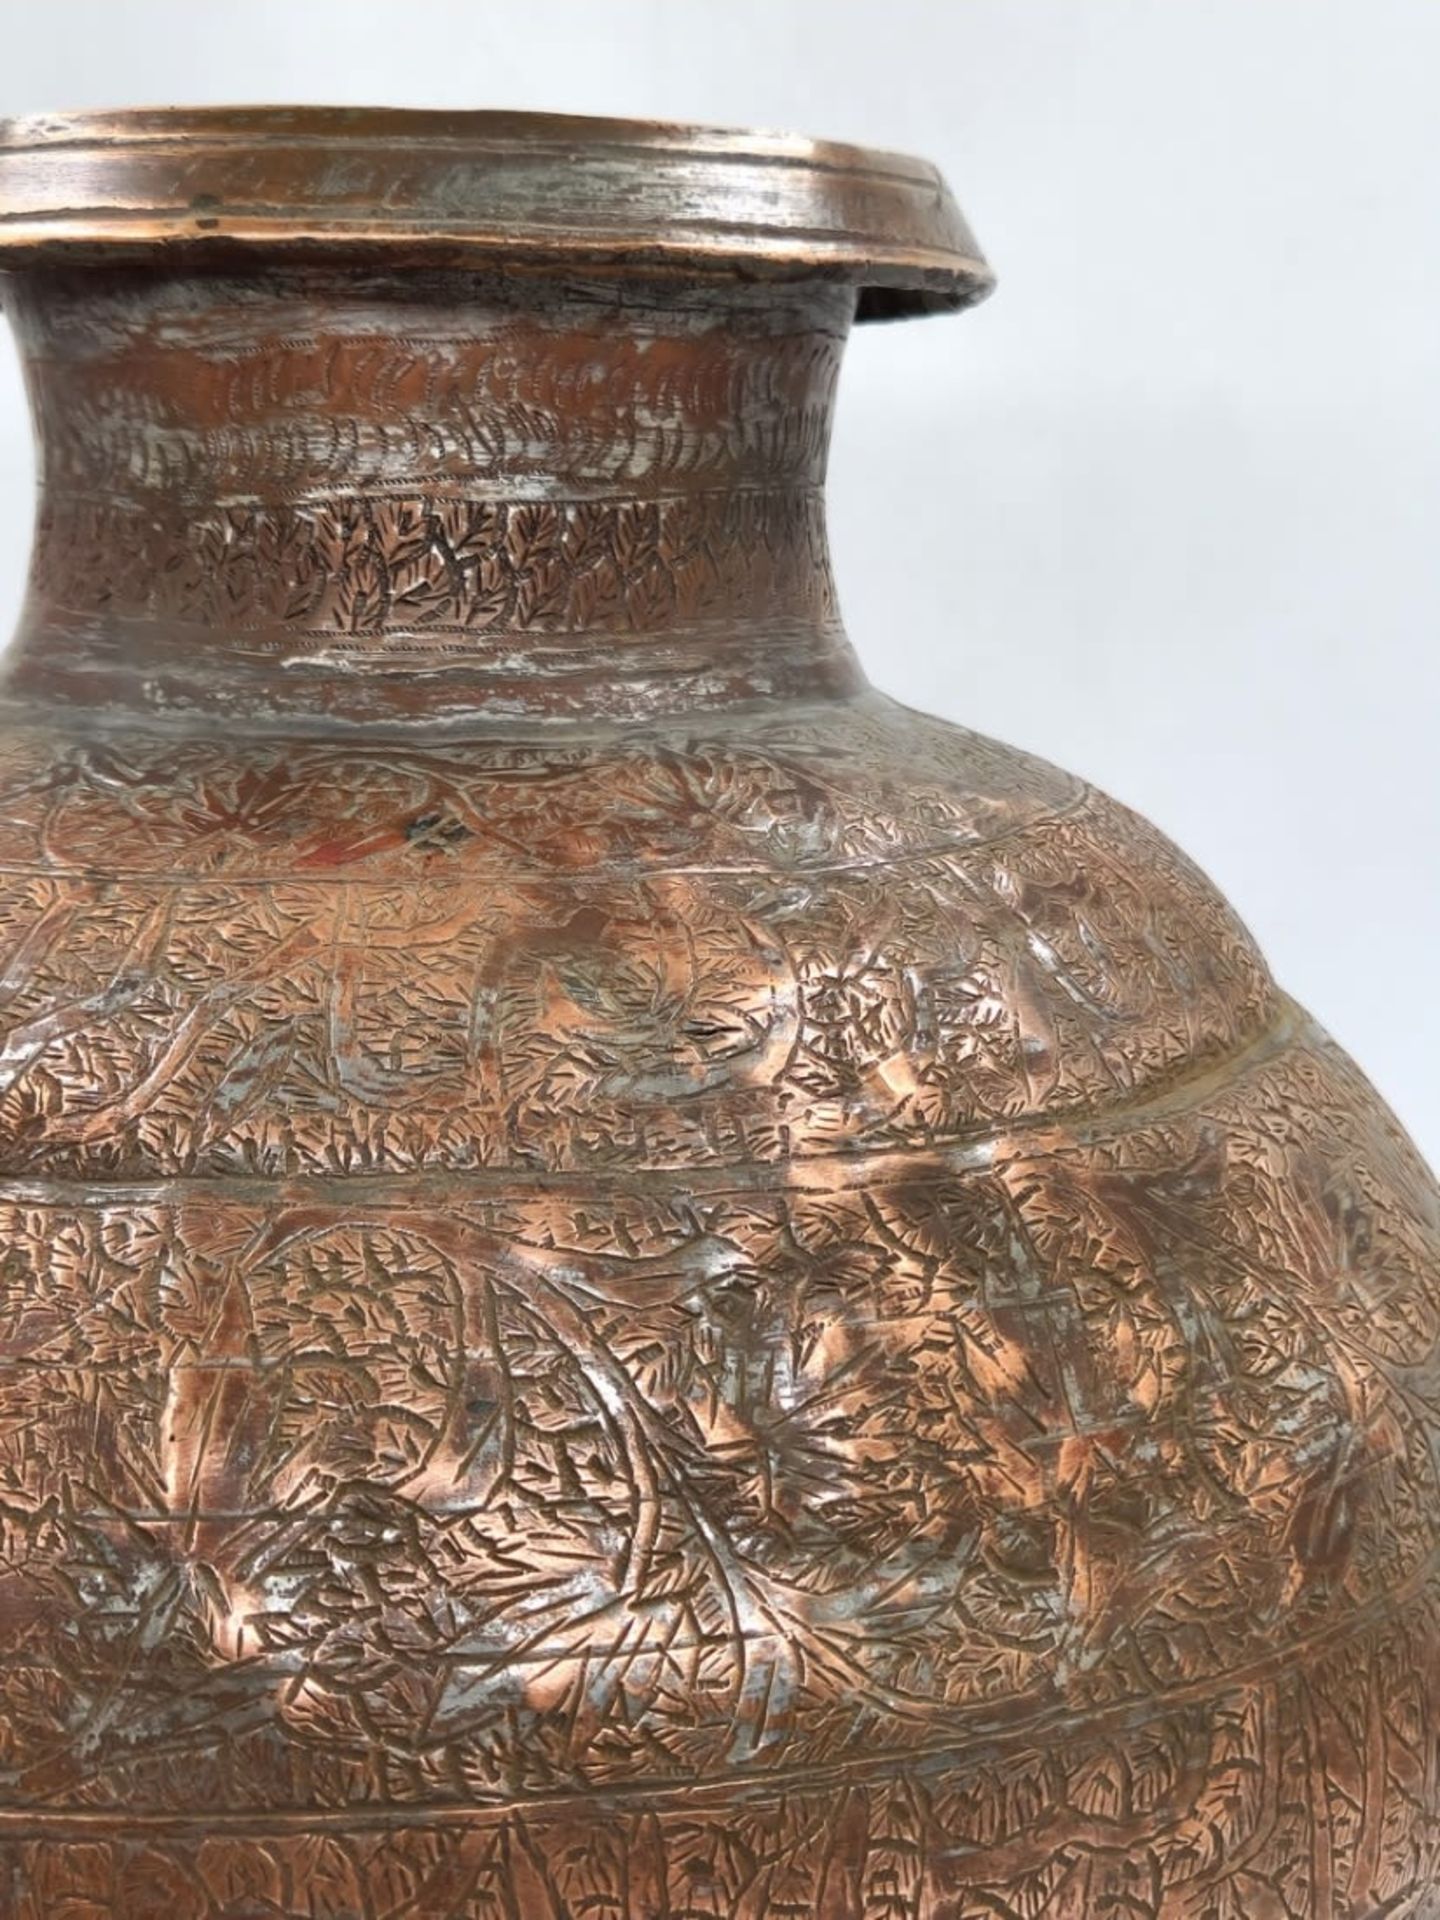 A large and beautiful antique Asian water jug from the 19th century, made in the Dhamrai region, - Image 7 of 8